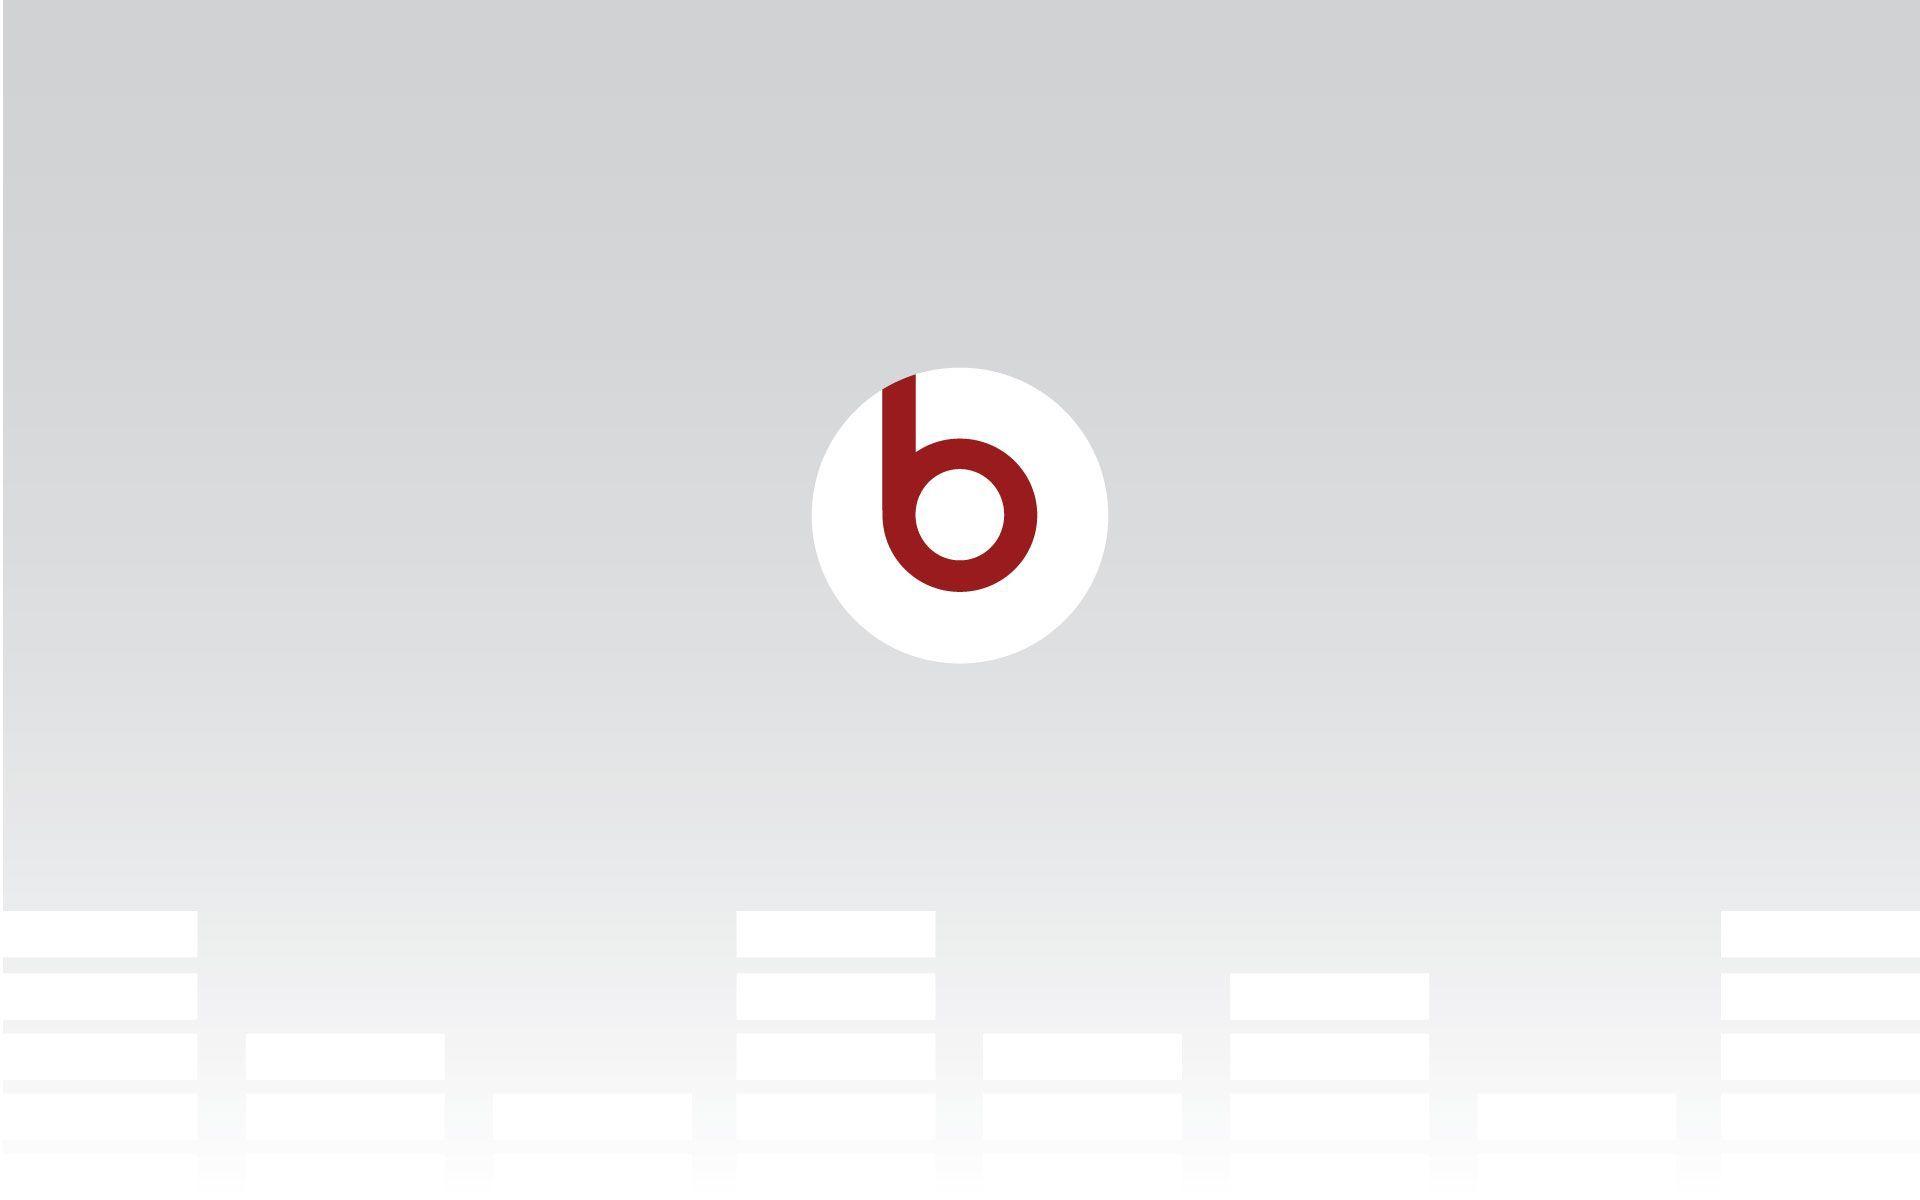 Black Beats by Dre Logo - Image result for beats by dre logo white | Product Spot | Wallpaper ...